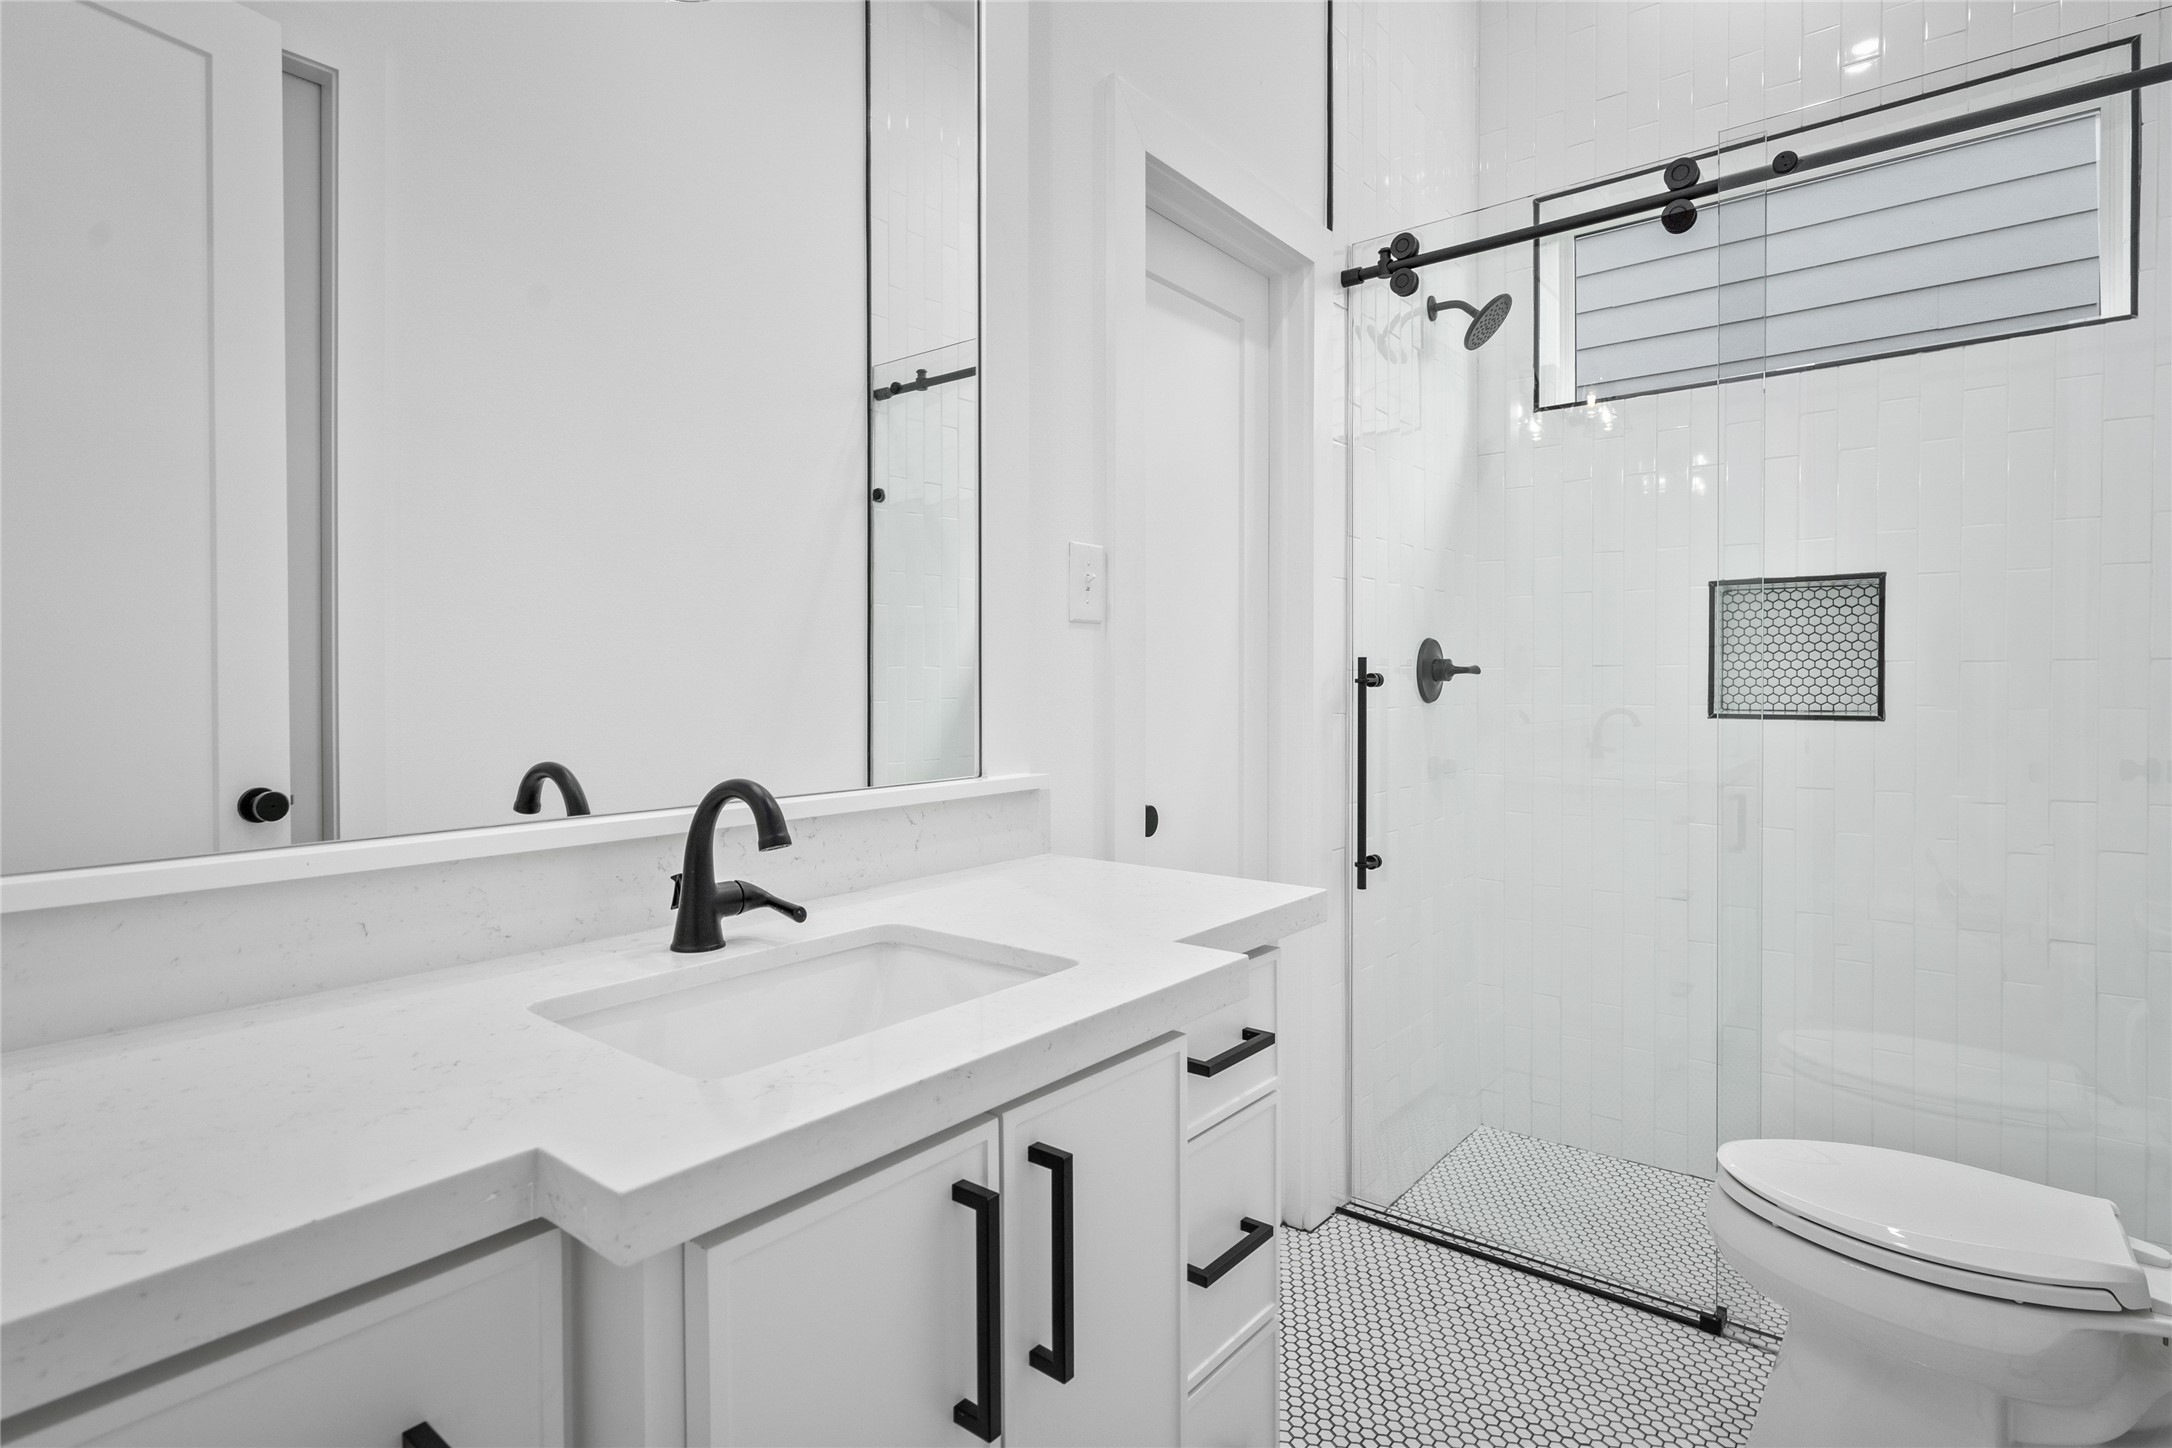 The beautifully designed en-suite full bathroom can be accessed via the 1st floor bedroom and the hallway.